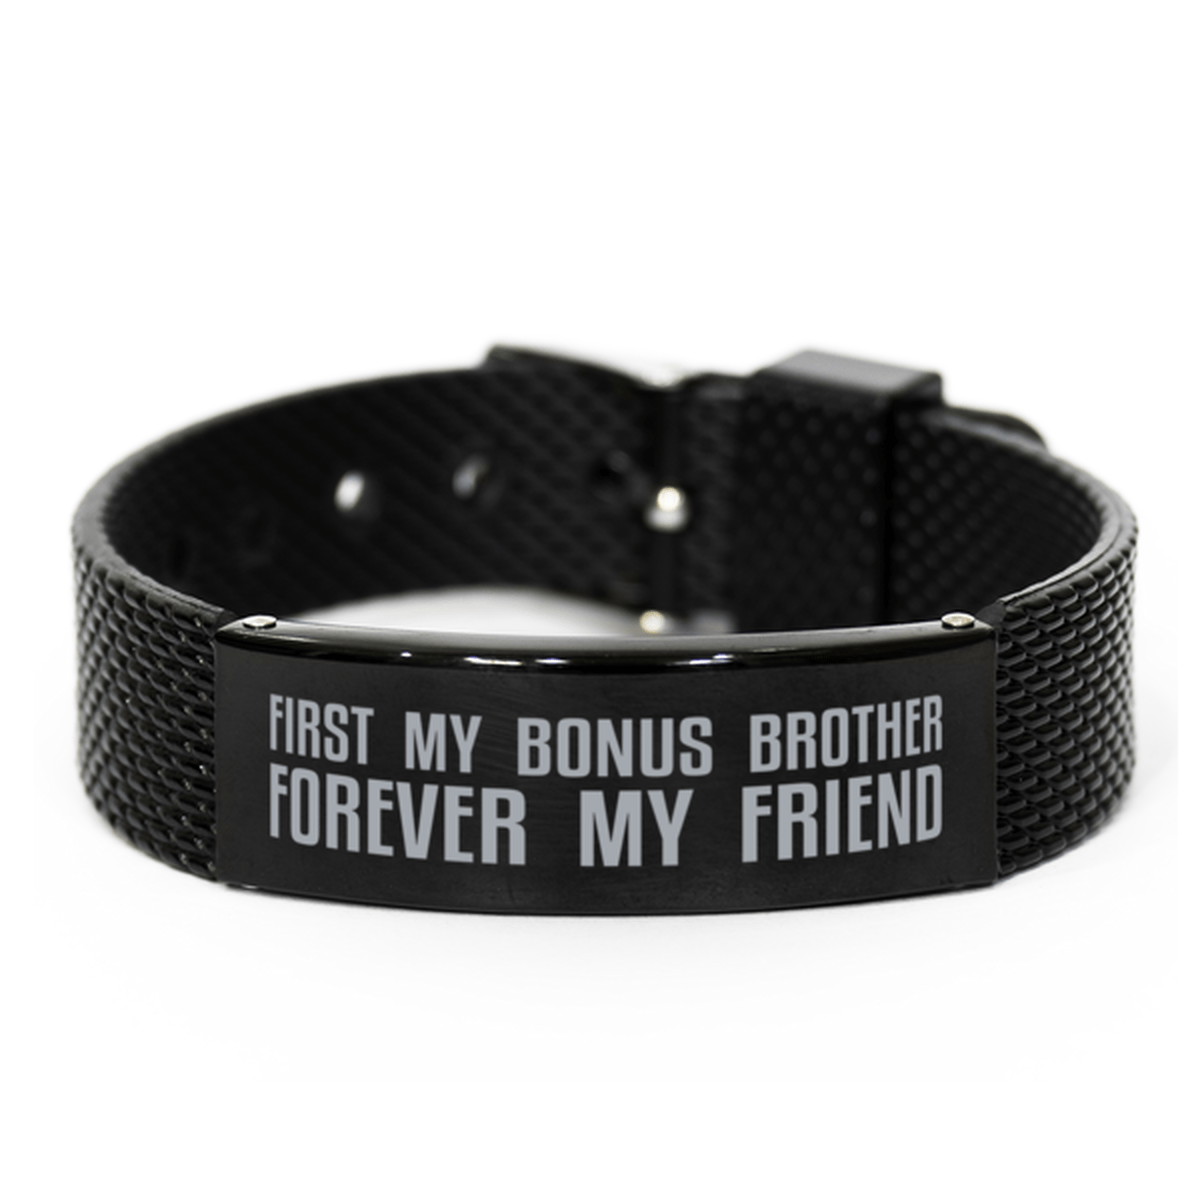 Unique Bonus Brother Black Shark Mesh Bracelet, First My Bonus Brother Forever My Friend, Best Gift for Stepbrother Brother-in-Law Birthday, Christmas